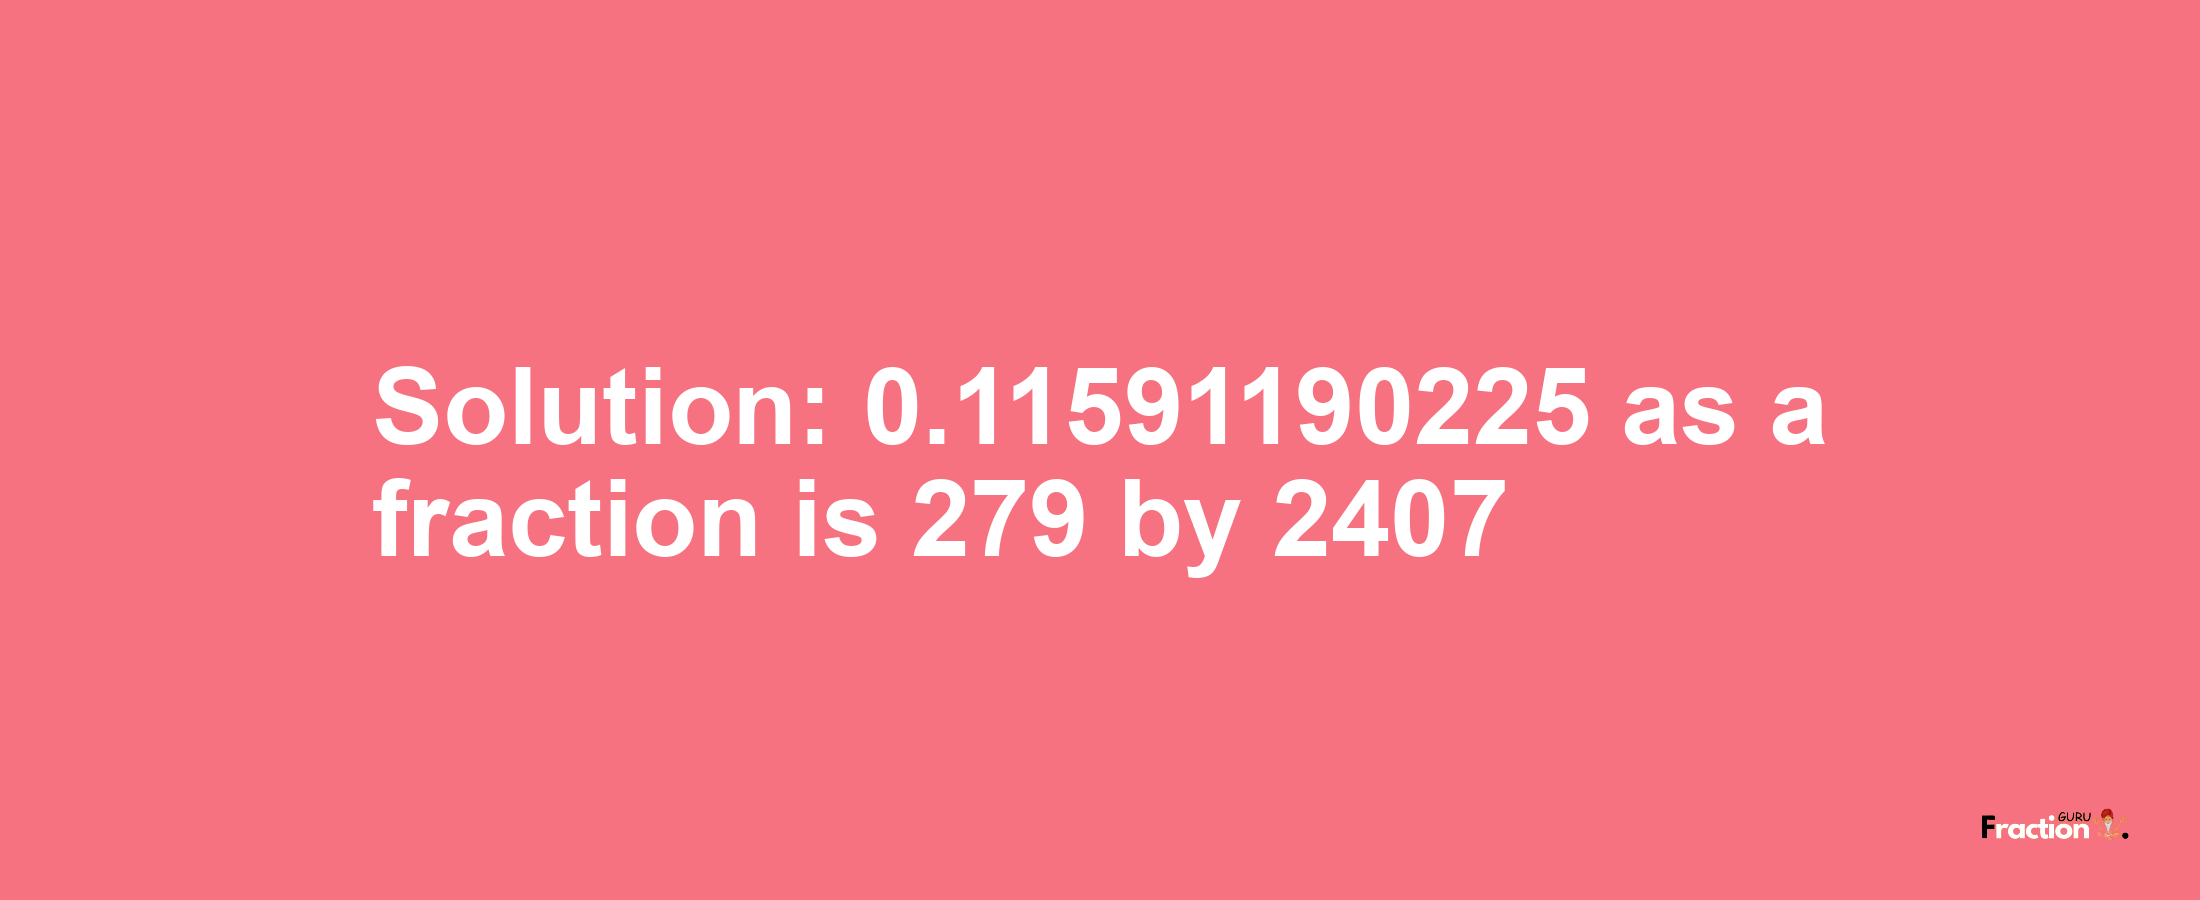 Solution:0.11591190225 as a fraction is 279/2407